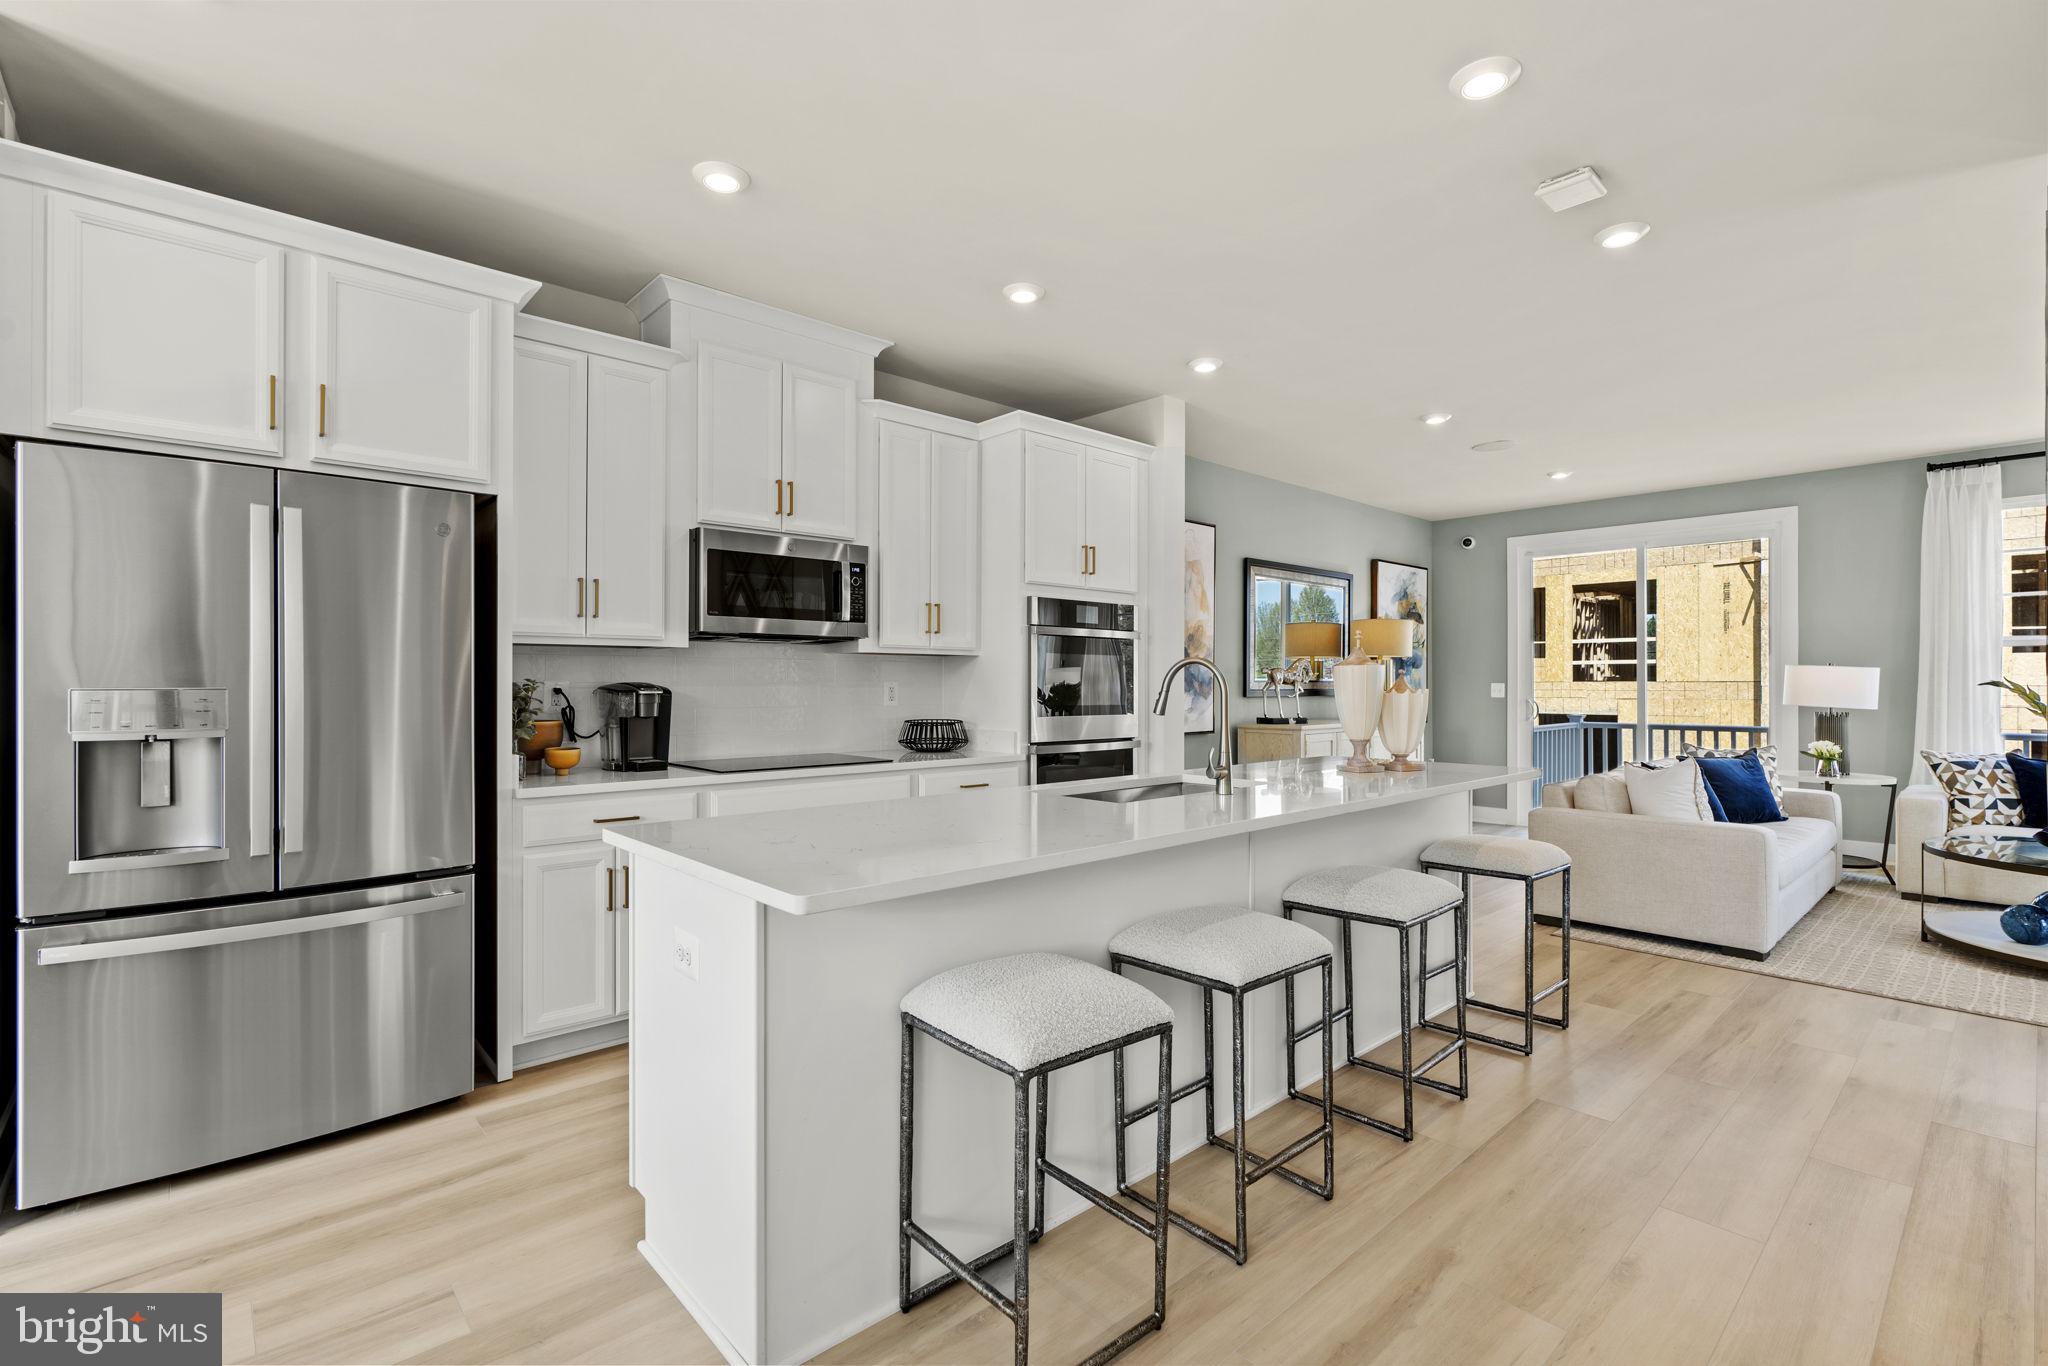 a kitchen with counter space cabinets and stainless steel appliances